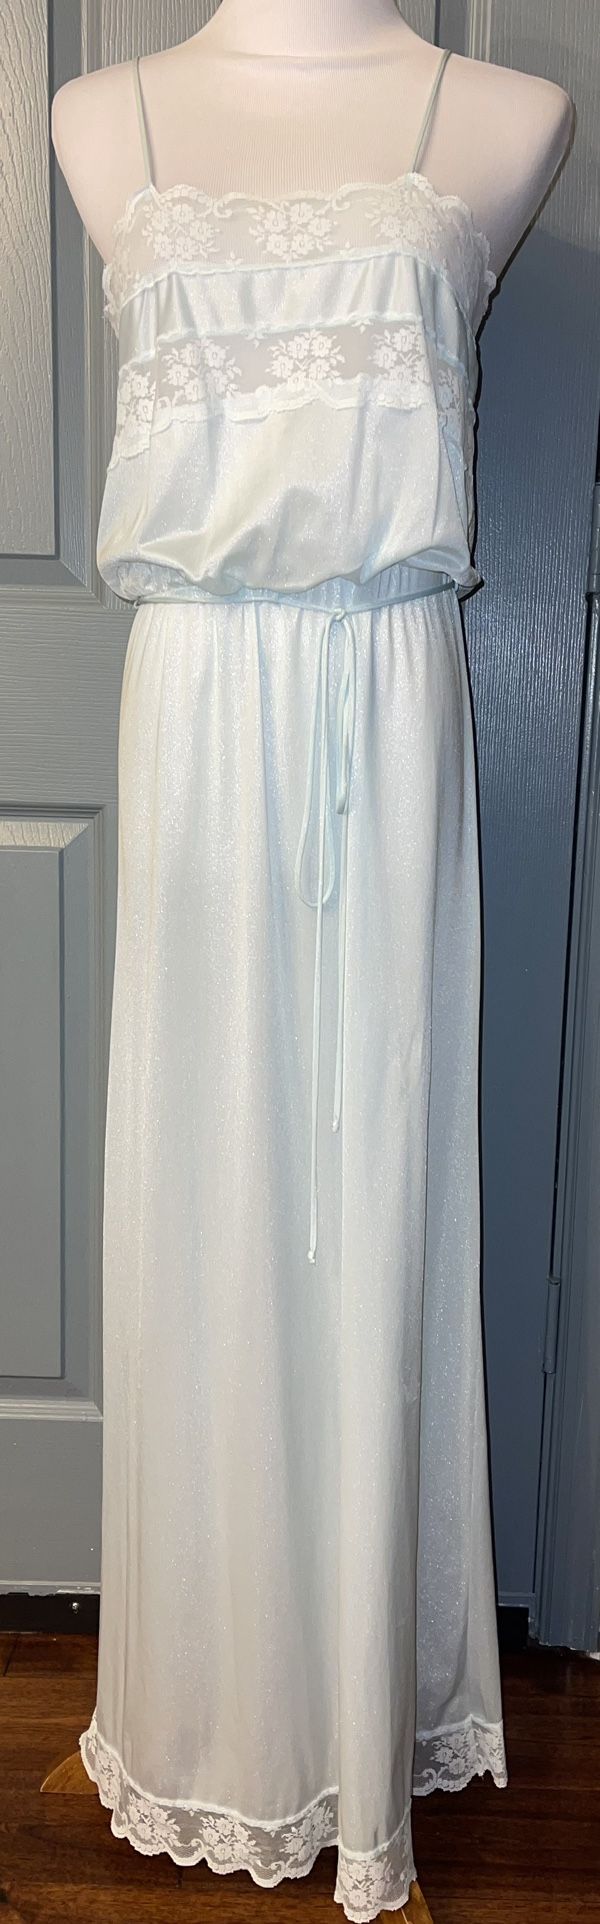 Flair Vintage Lace Trim Blue Long Nylon Nightgown. Made In USA